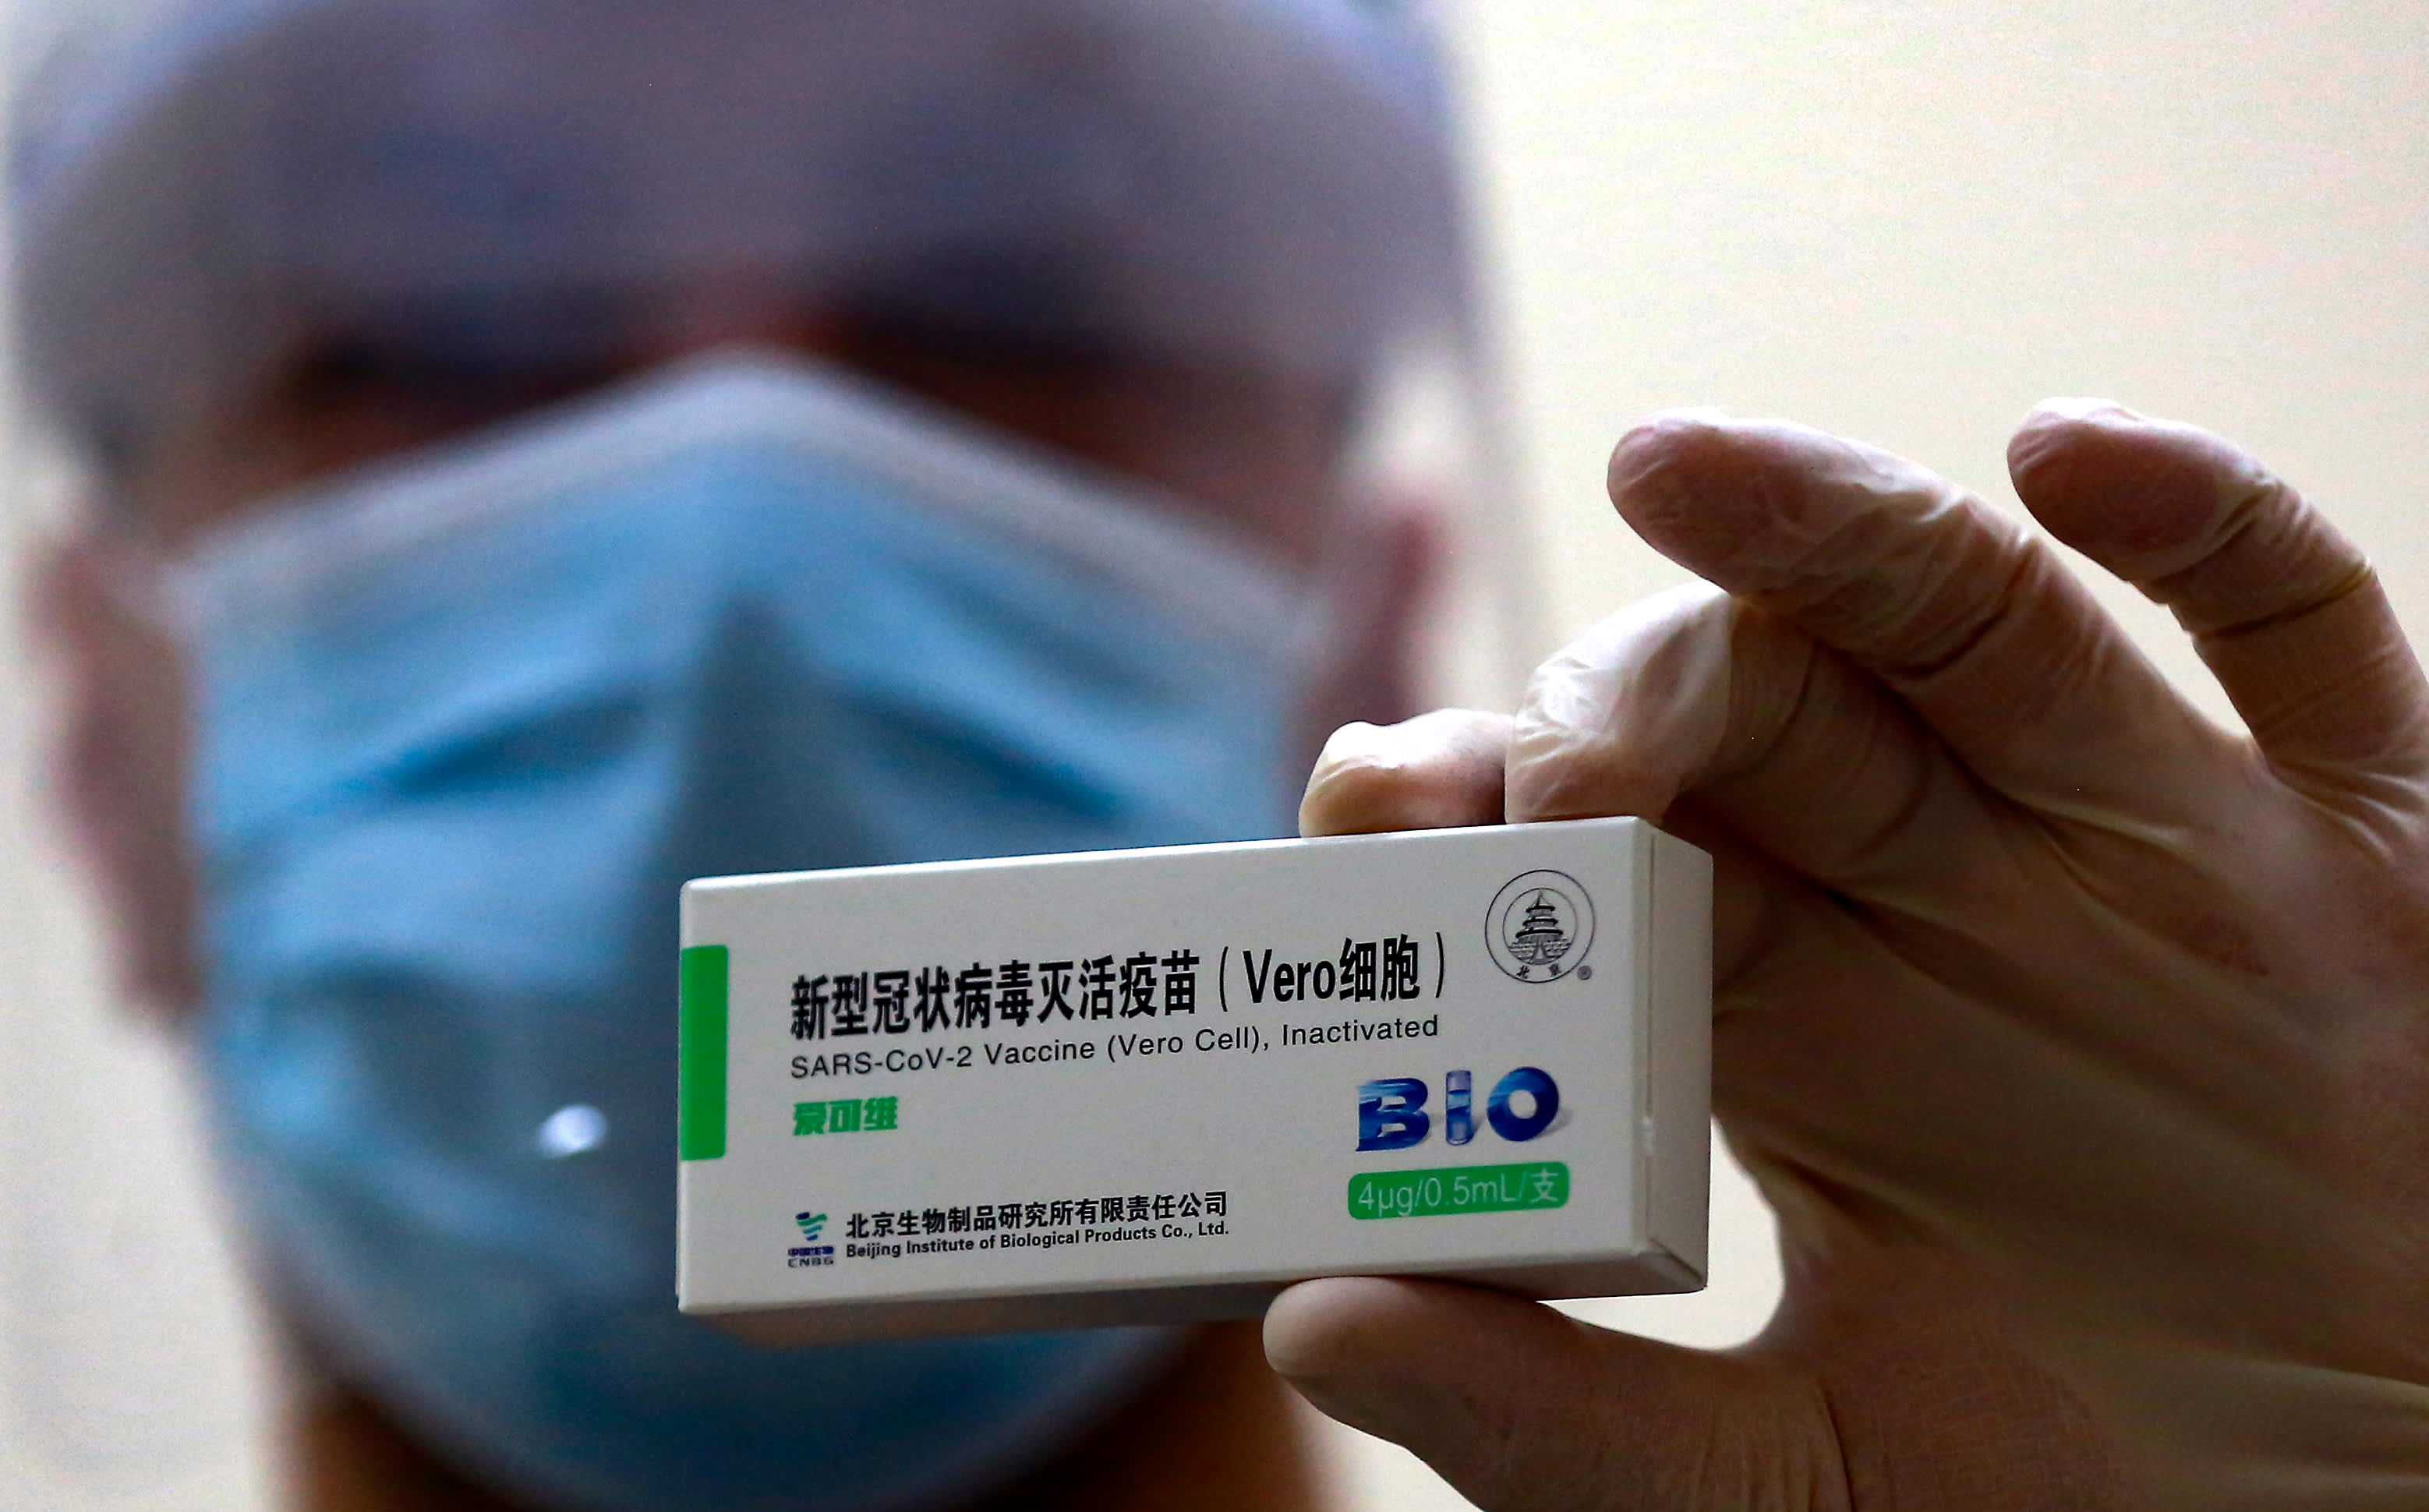 Chinese vaccine maker Sinopharm says chairman and director have resigned